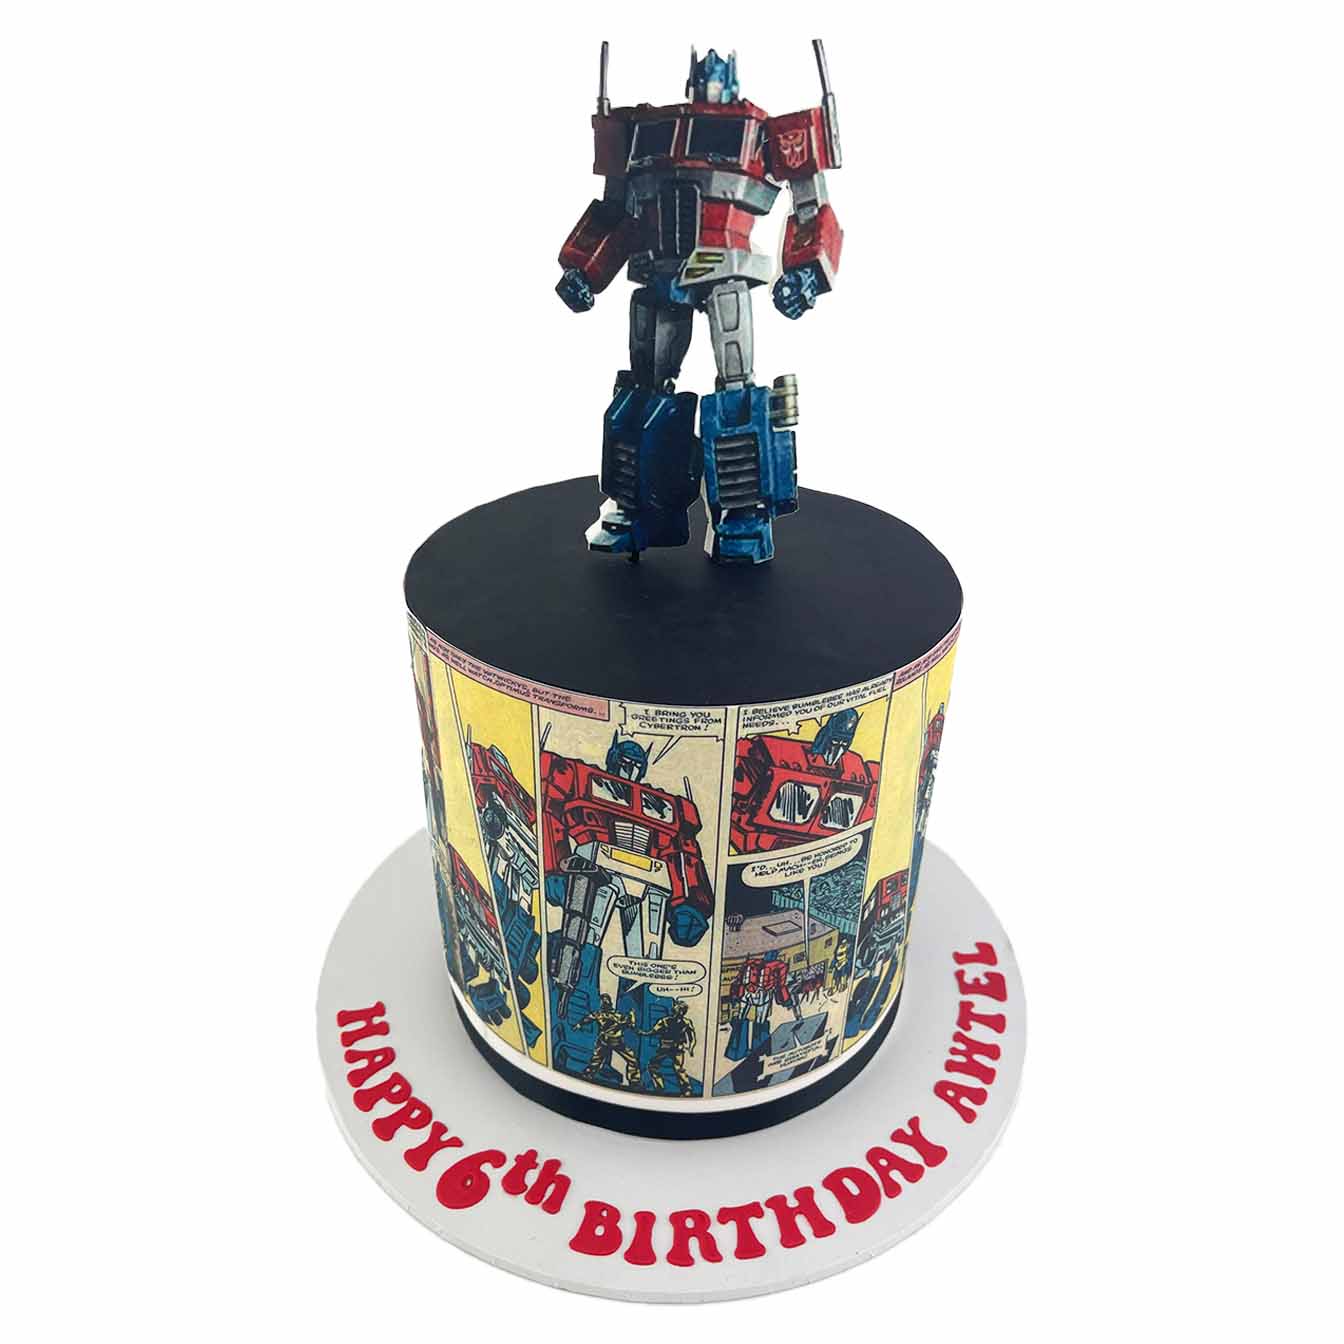 Optimus Prime Power Cake - A double-height cake with 2D standing edible image of Optimus Prime on top and comic book-style image wrap, a thrilling centrepiece for Transformers fans.